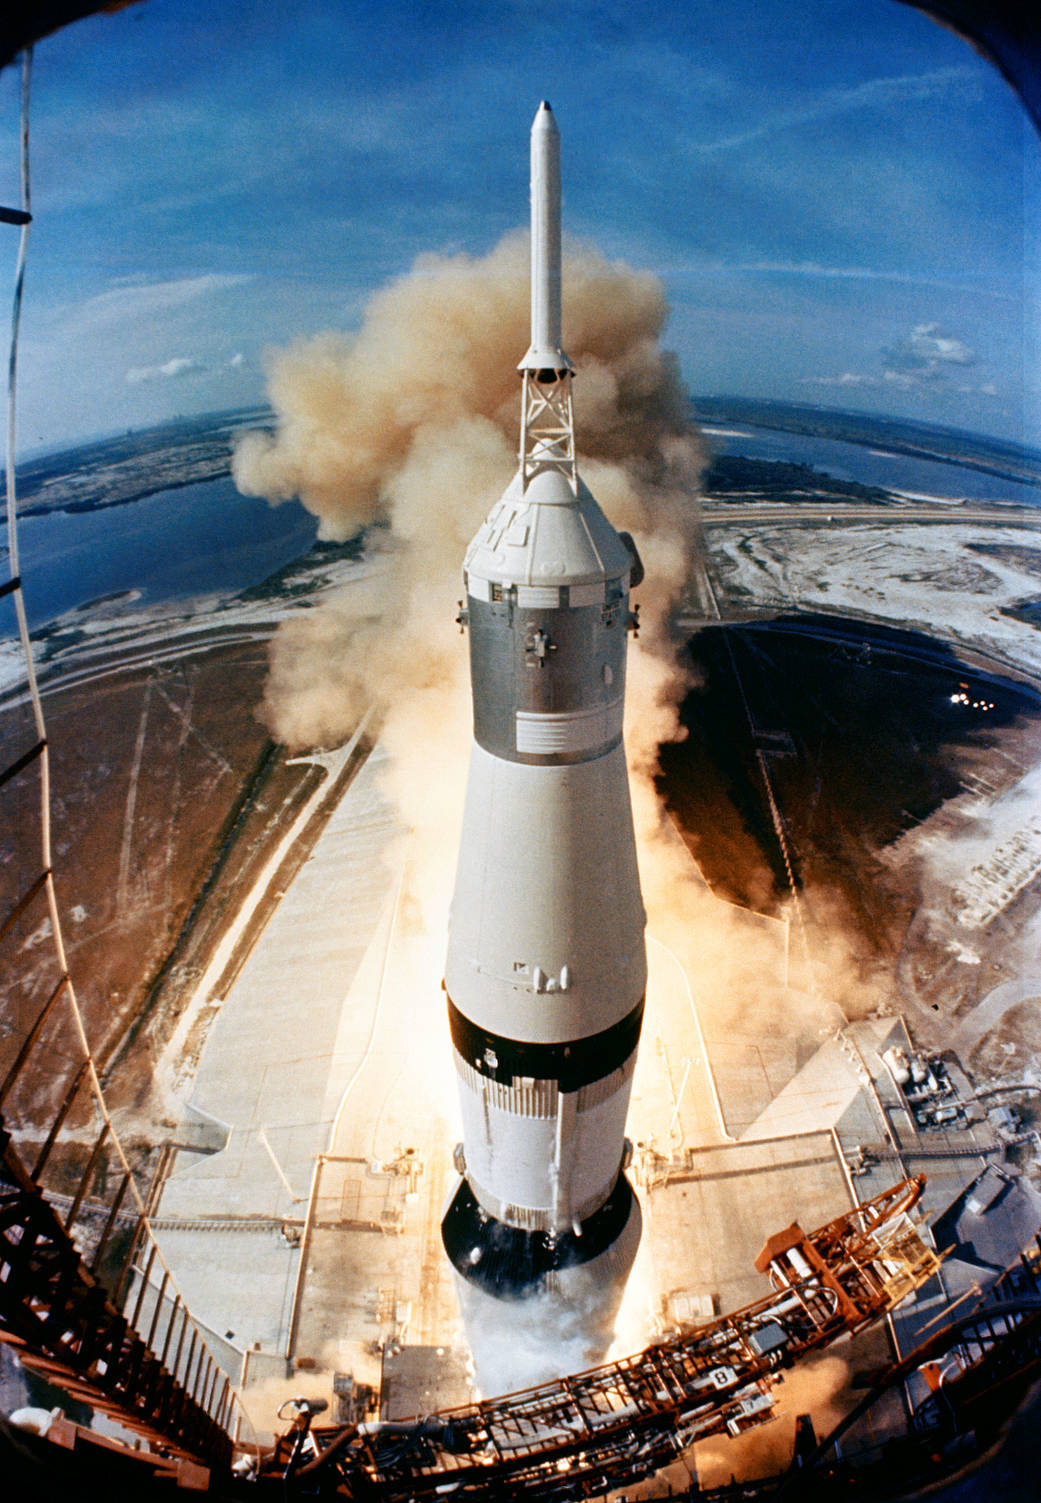 On July 16, 1969, the huge, 363-feet tall Saturn V rocket launches on the Apollo 11 mission from Pad A, Launch Complex 39.